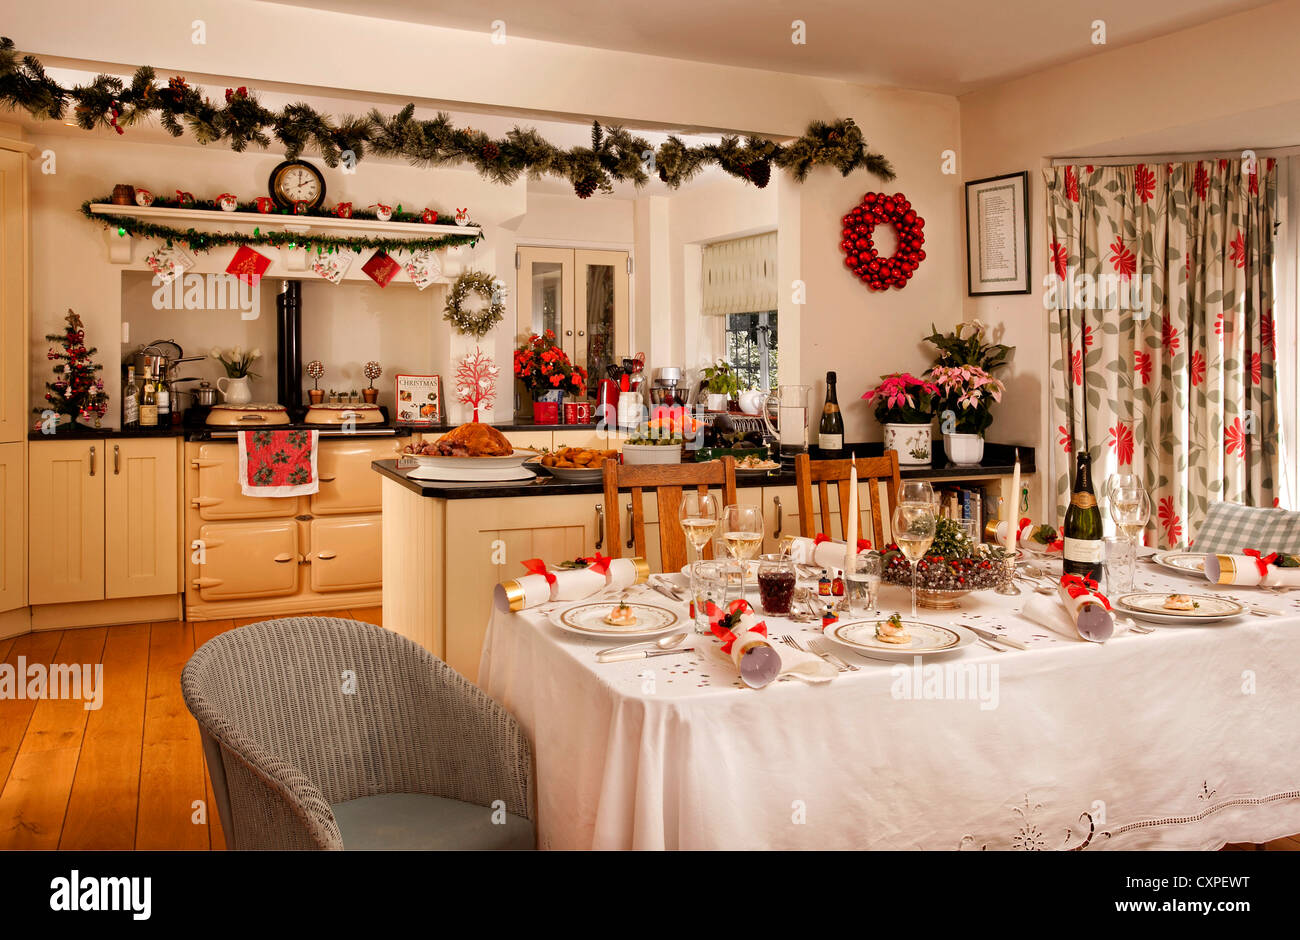 Country Kitchen diner set for Christmas lunch Stock Photo